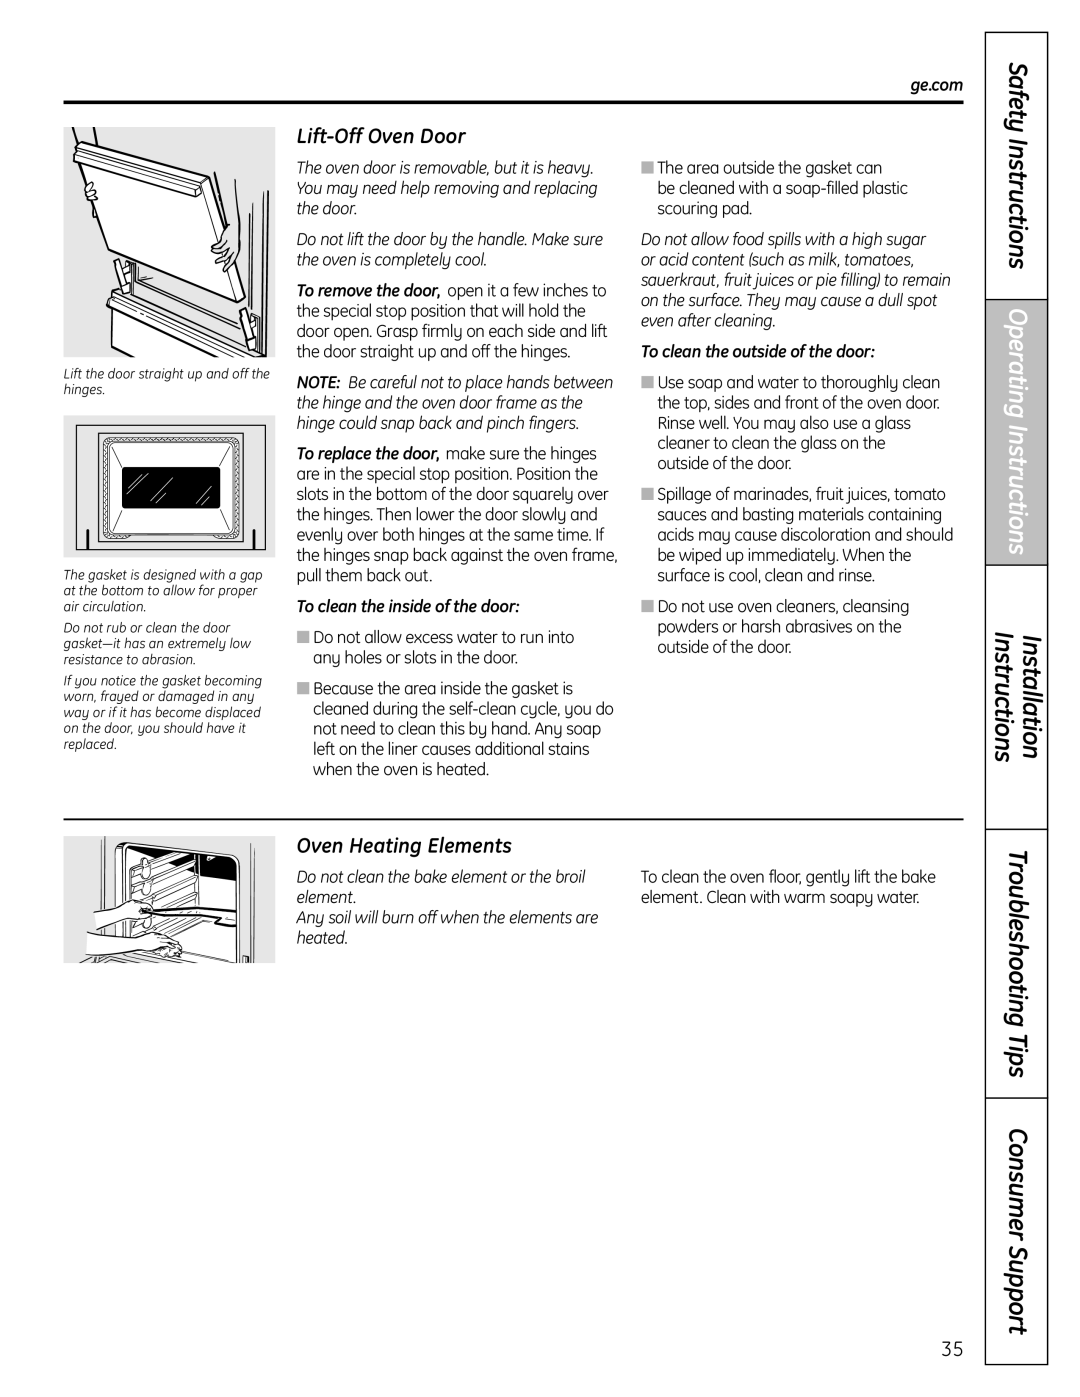 GE P2B918 Lift-Off Oven Door, Oven Heating Elements, Instructions Operating Instructions, Installation, Safety, ge.com 